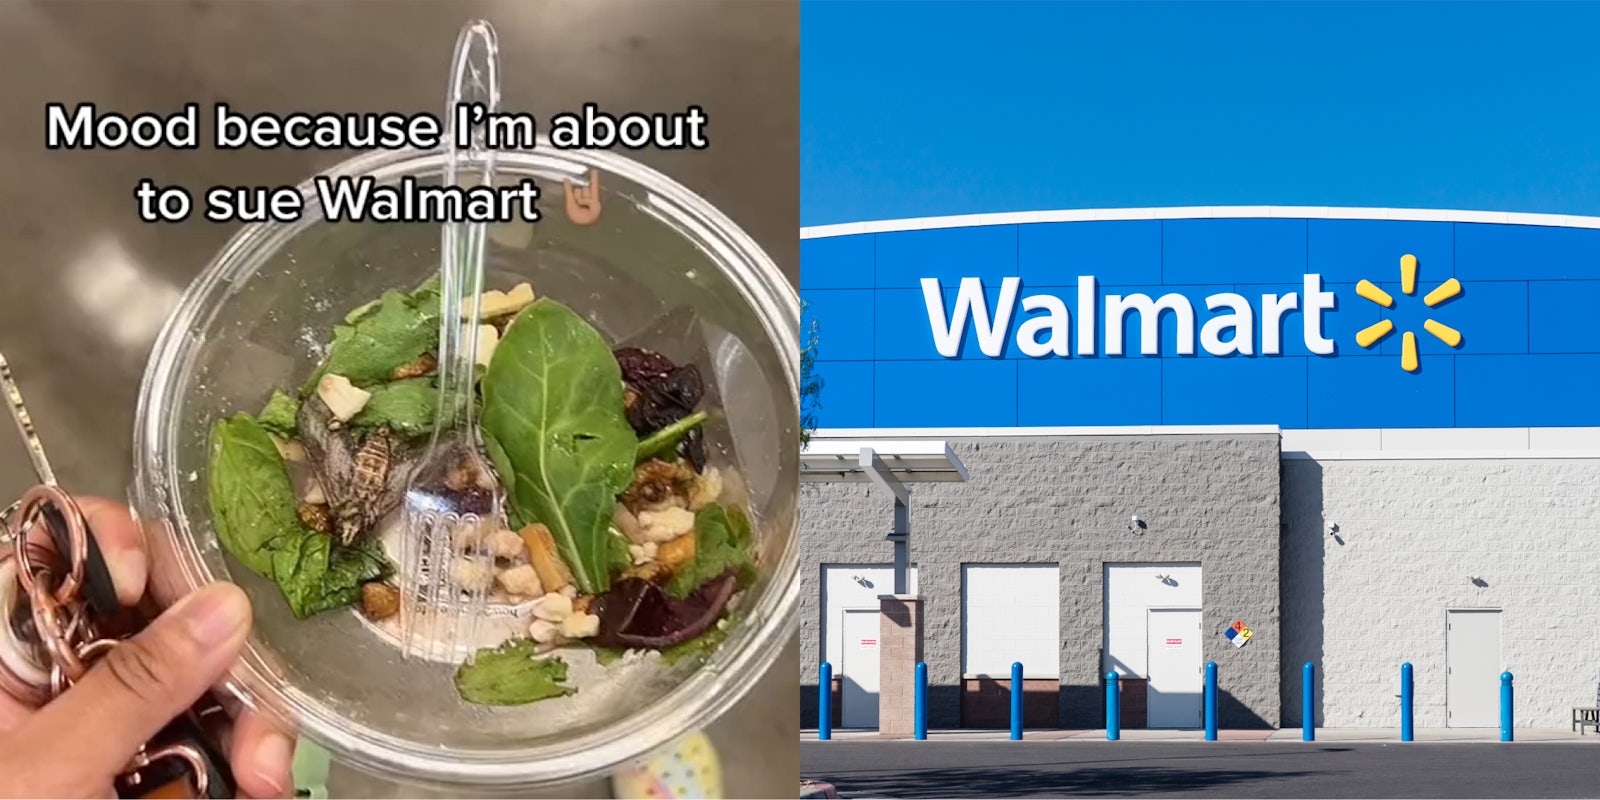 Walmart customer holding salad with moth with caption 'Mood because I'm about to sue Walmart' (l) Walmart building with sign and blue sky (r)